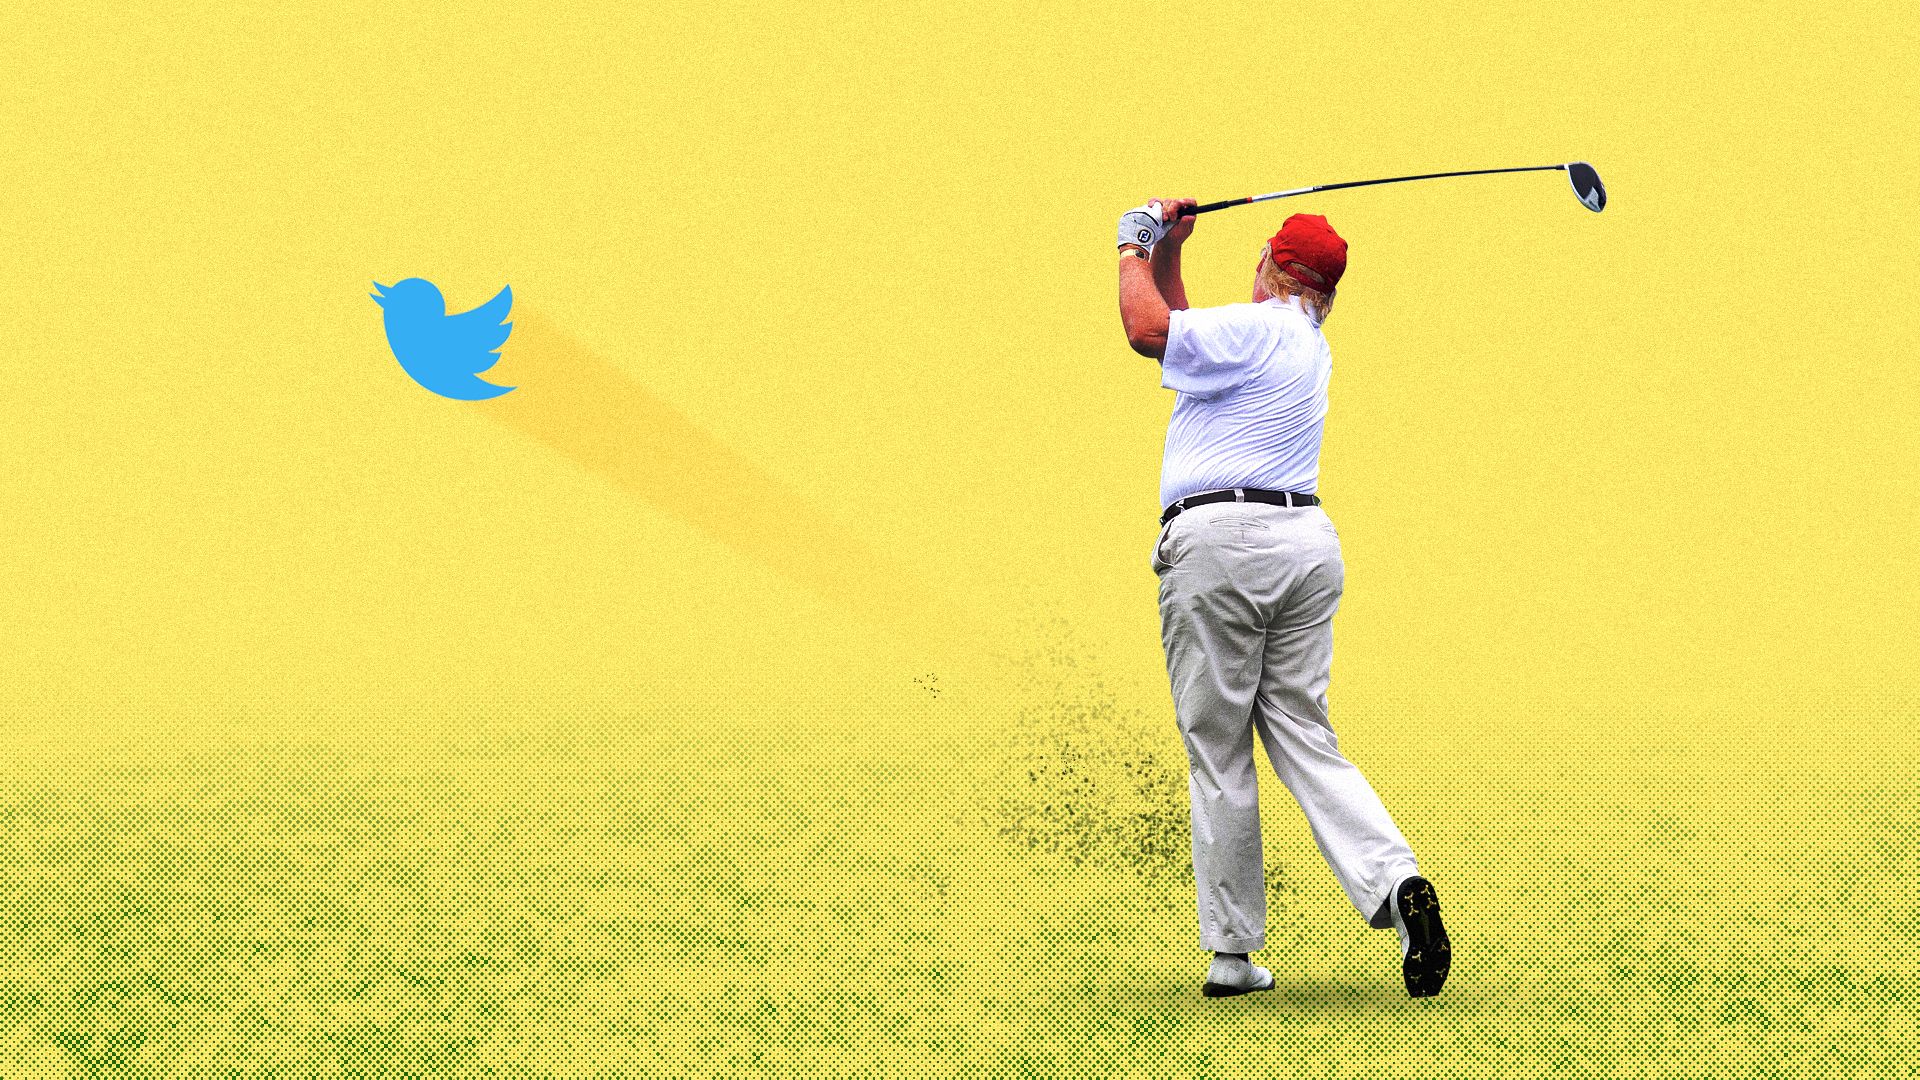 Trump swinging a golf club but instead of a golf ball flying into the air it's a Twitter logo.